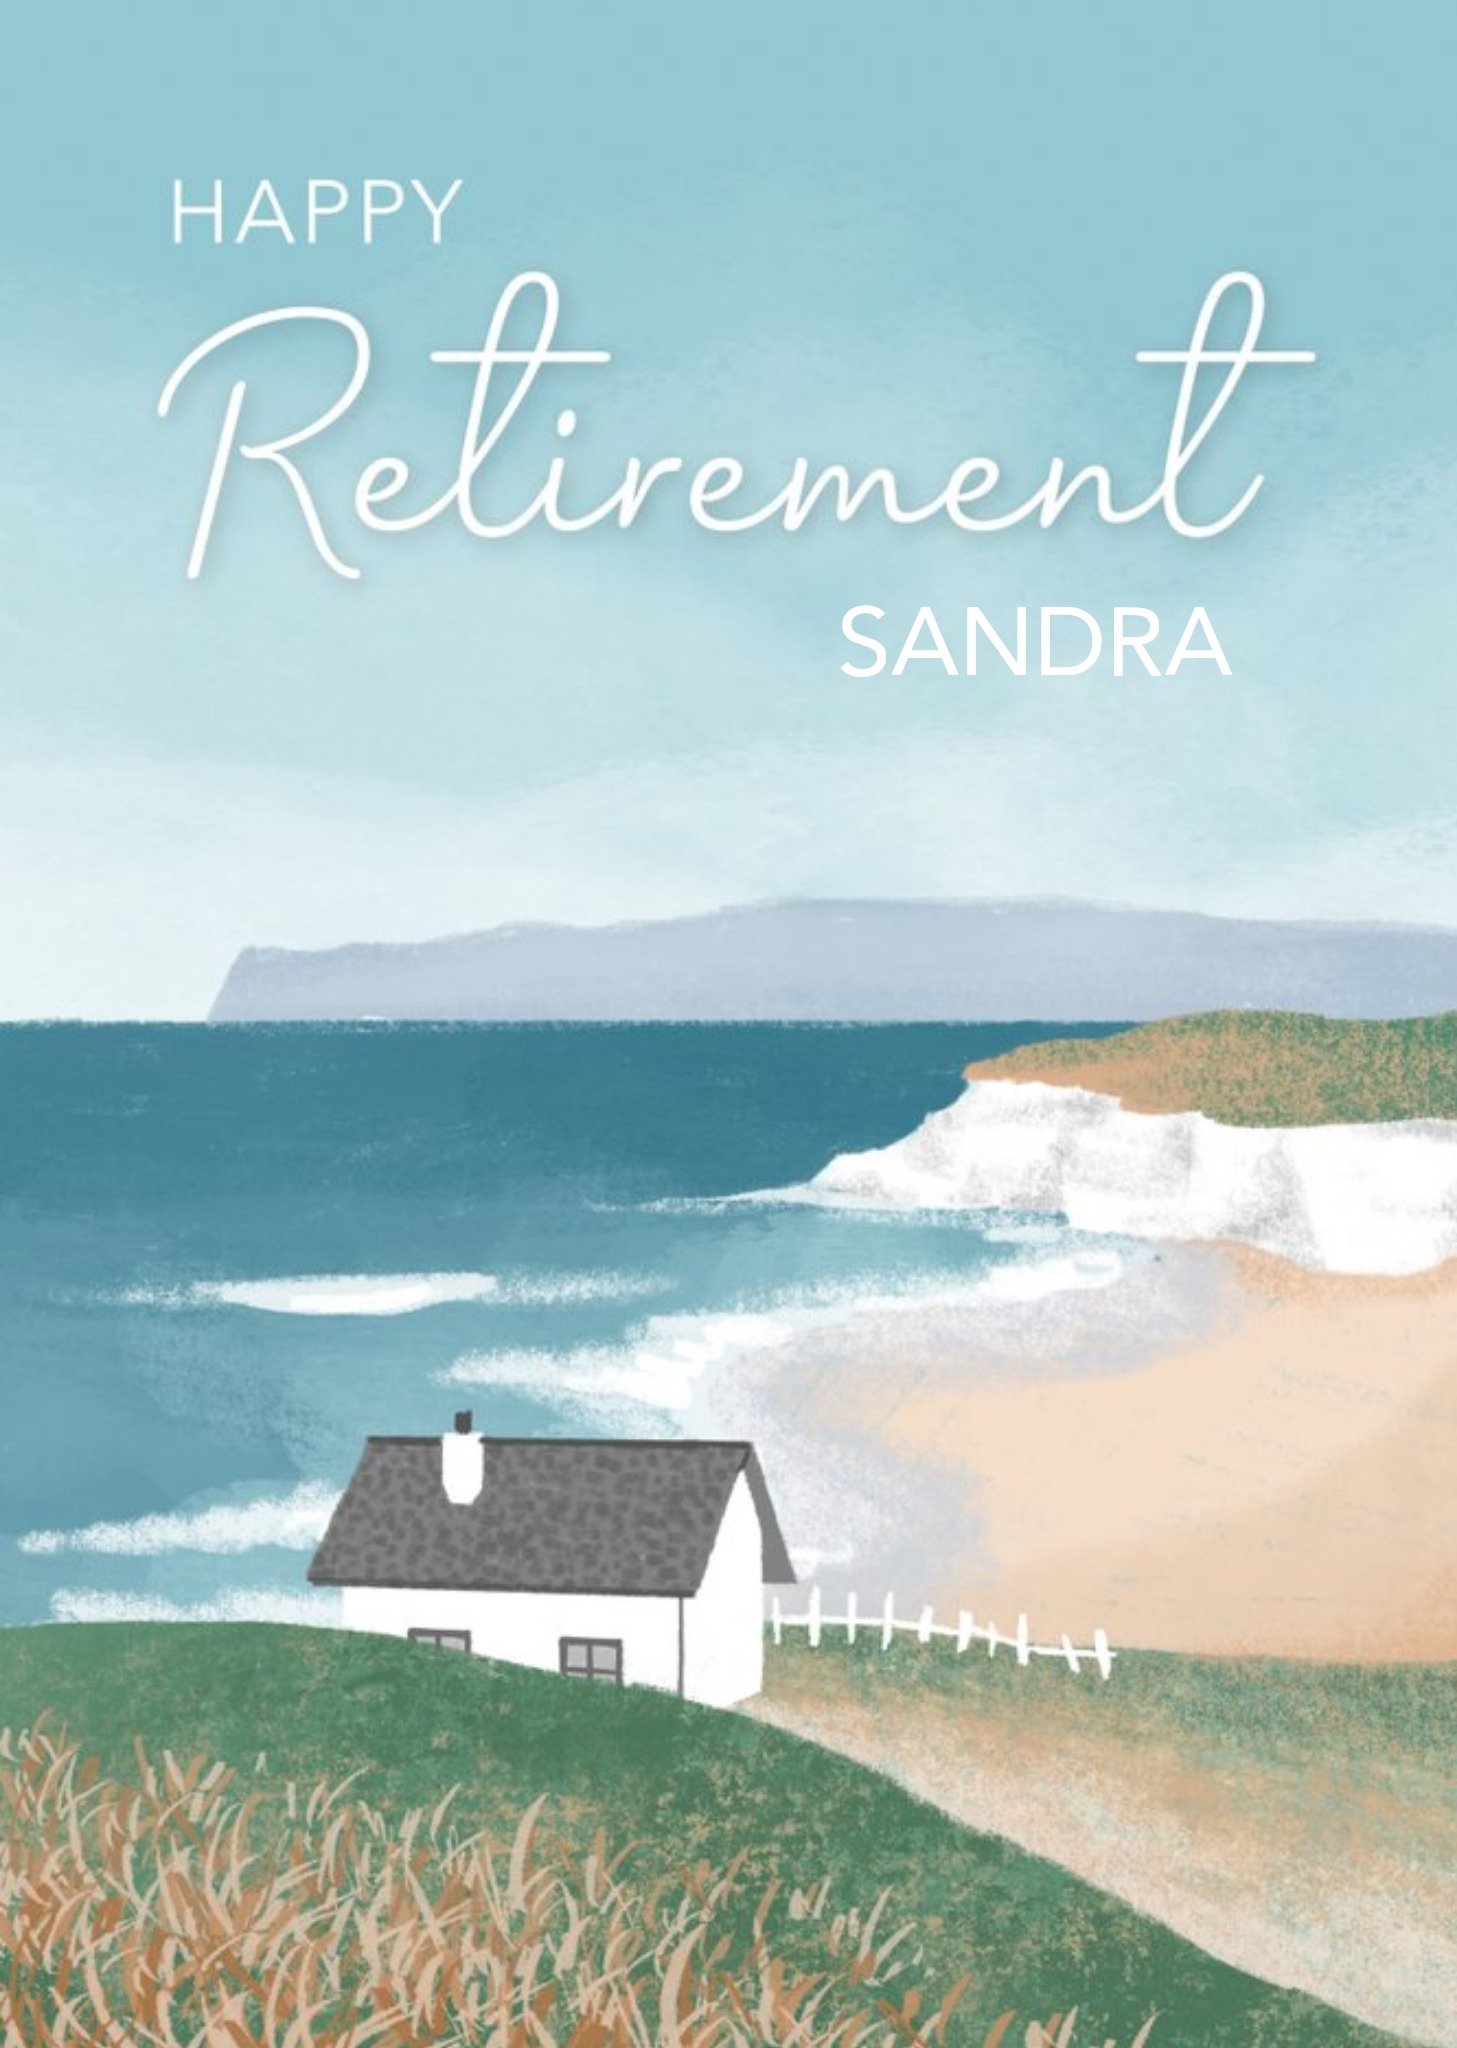 Moonpig Millicent Venton Illustrated House Overlooking The Beach. Happy Retirement Card Ecard